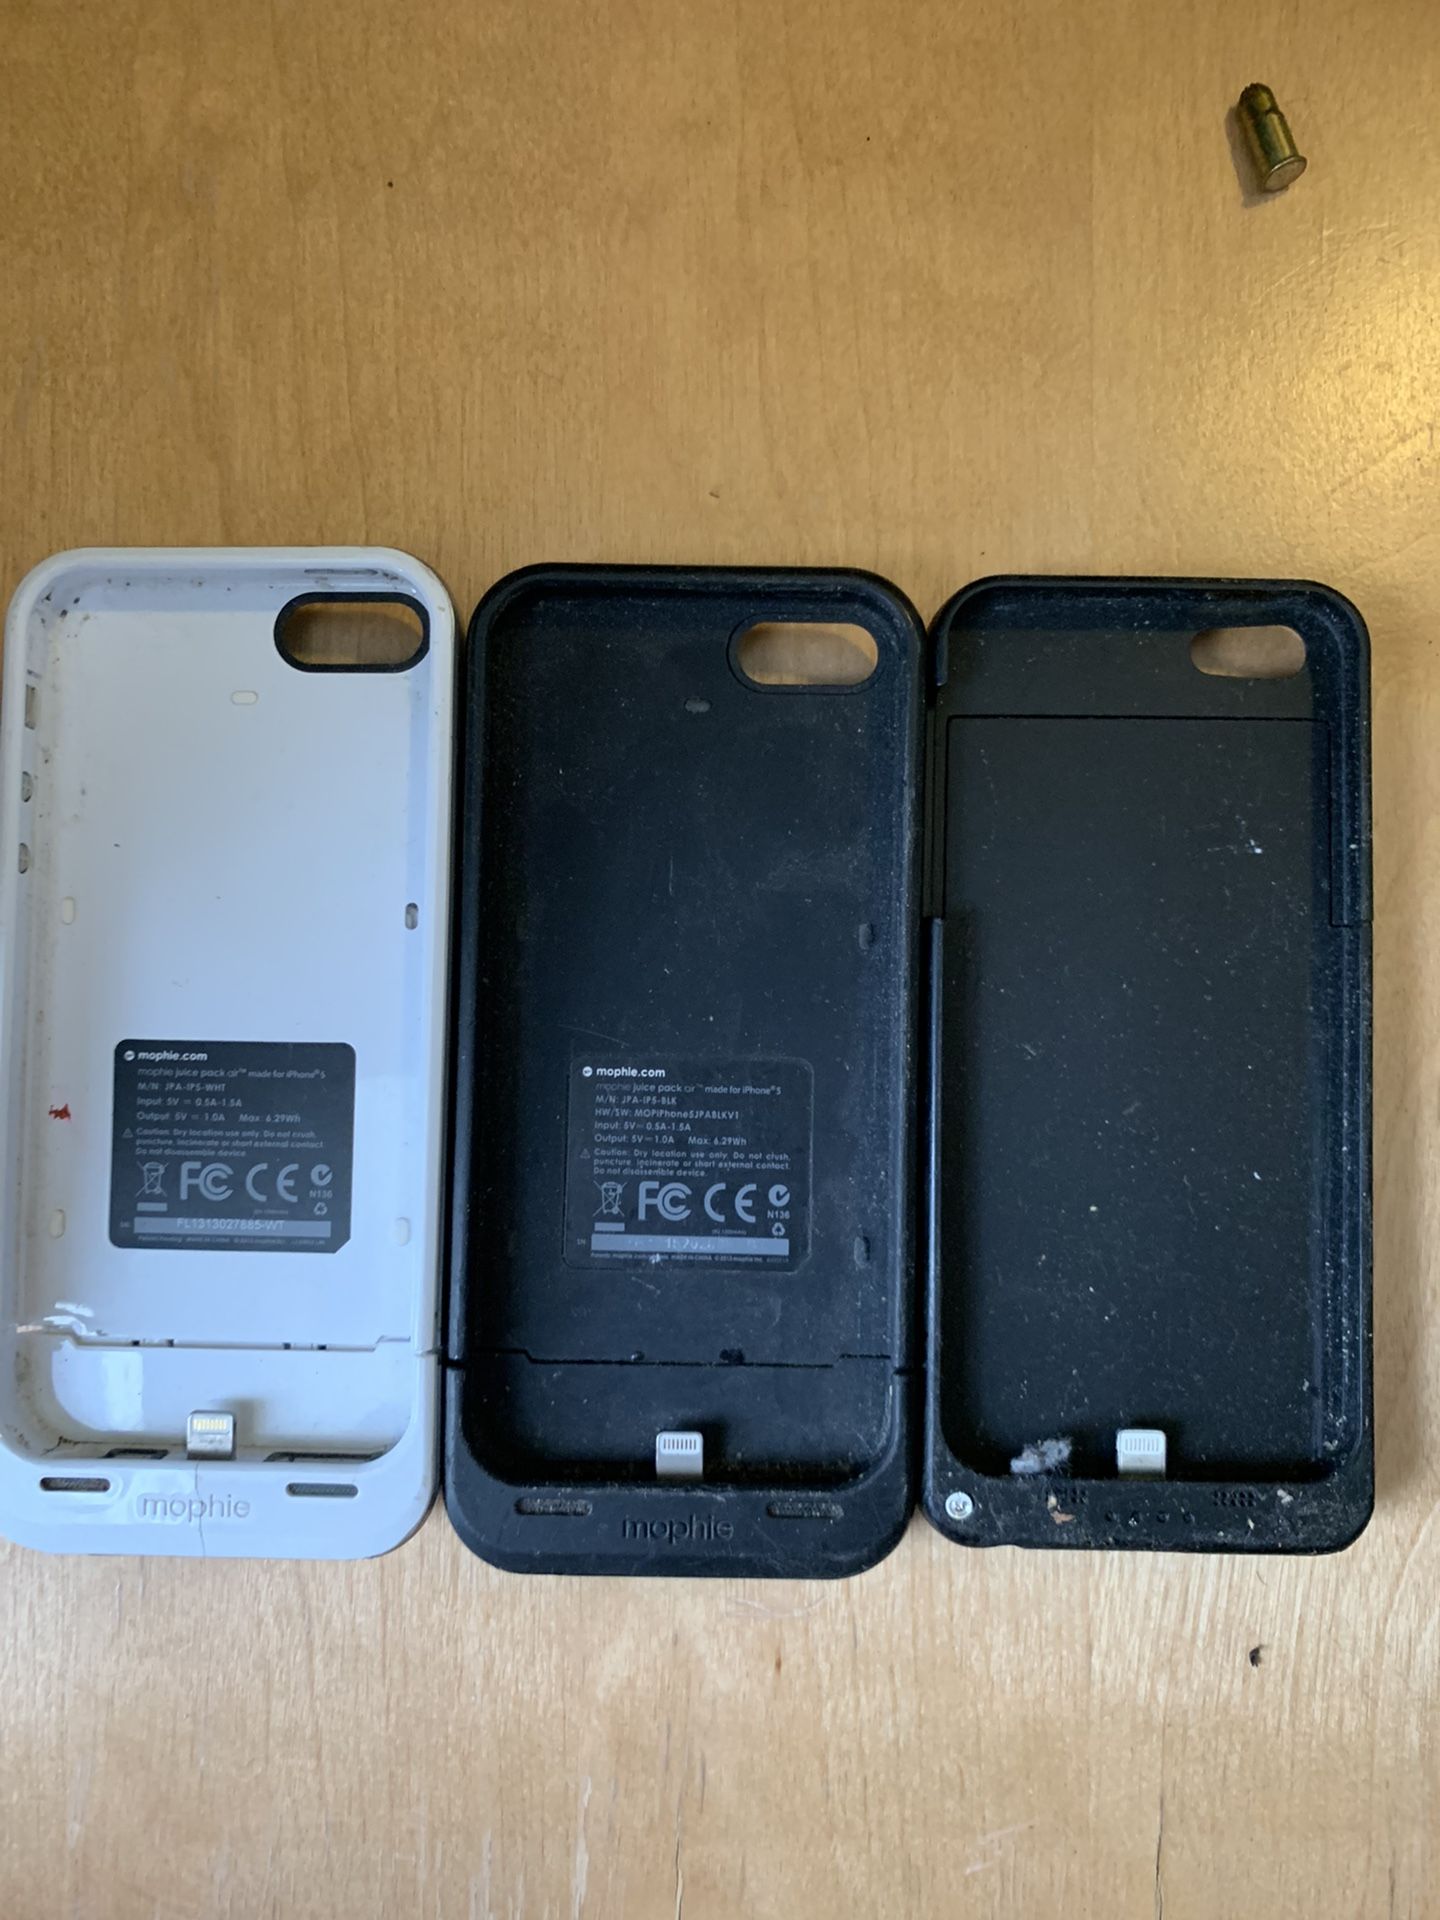 iPhone 5 Charging Cases